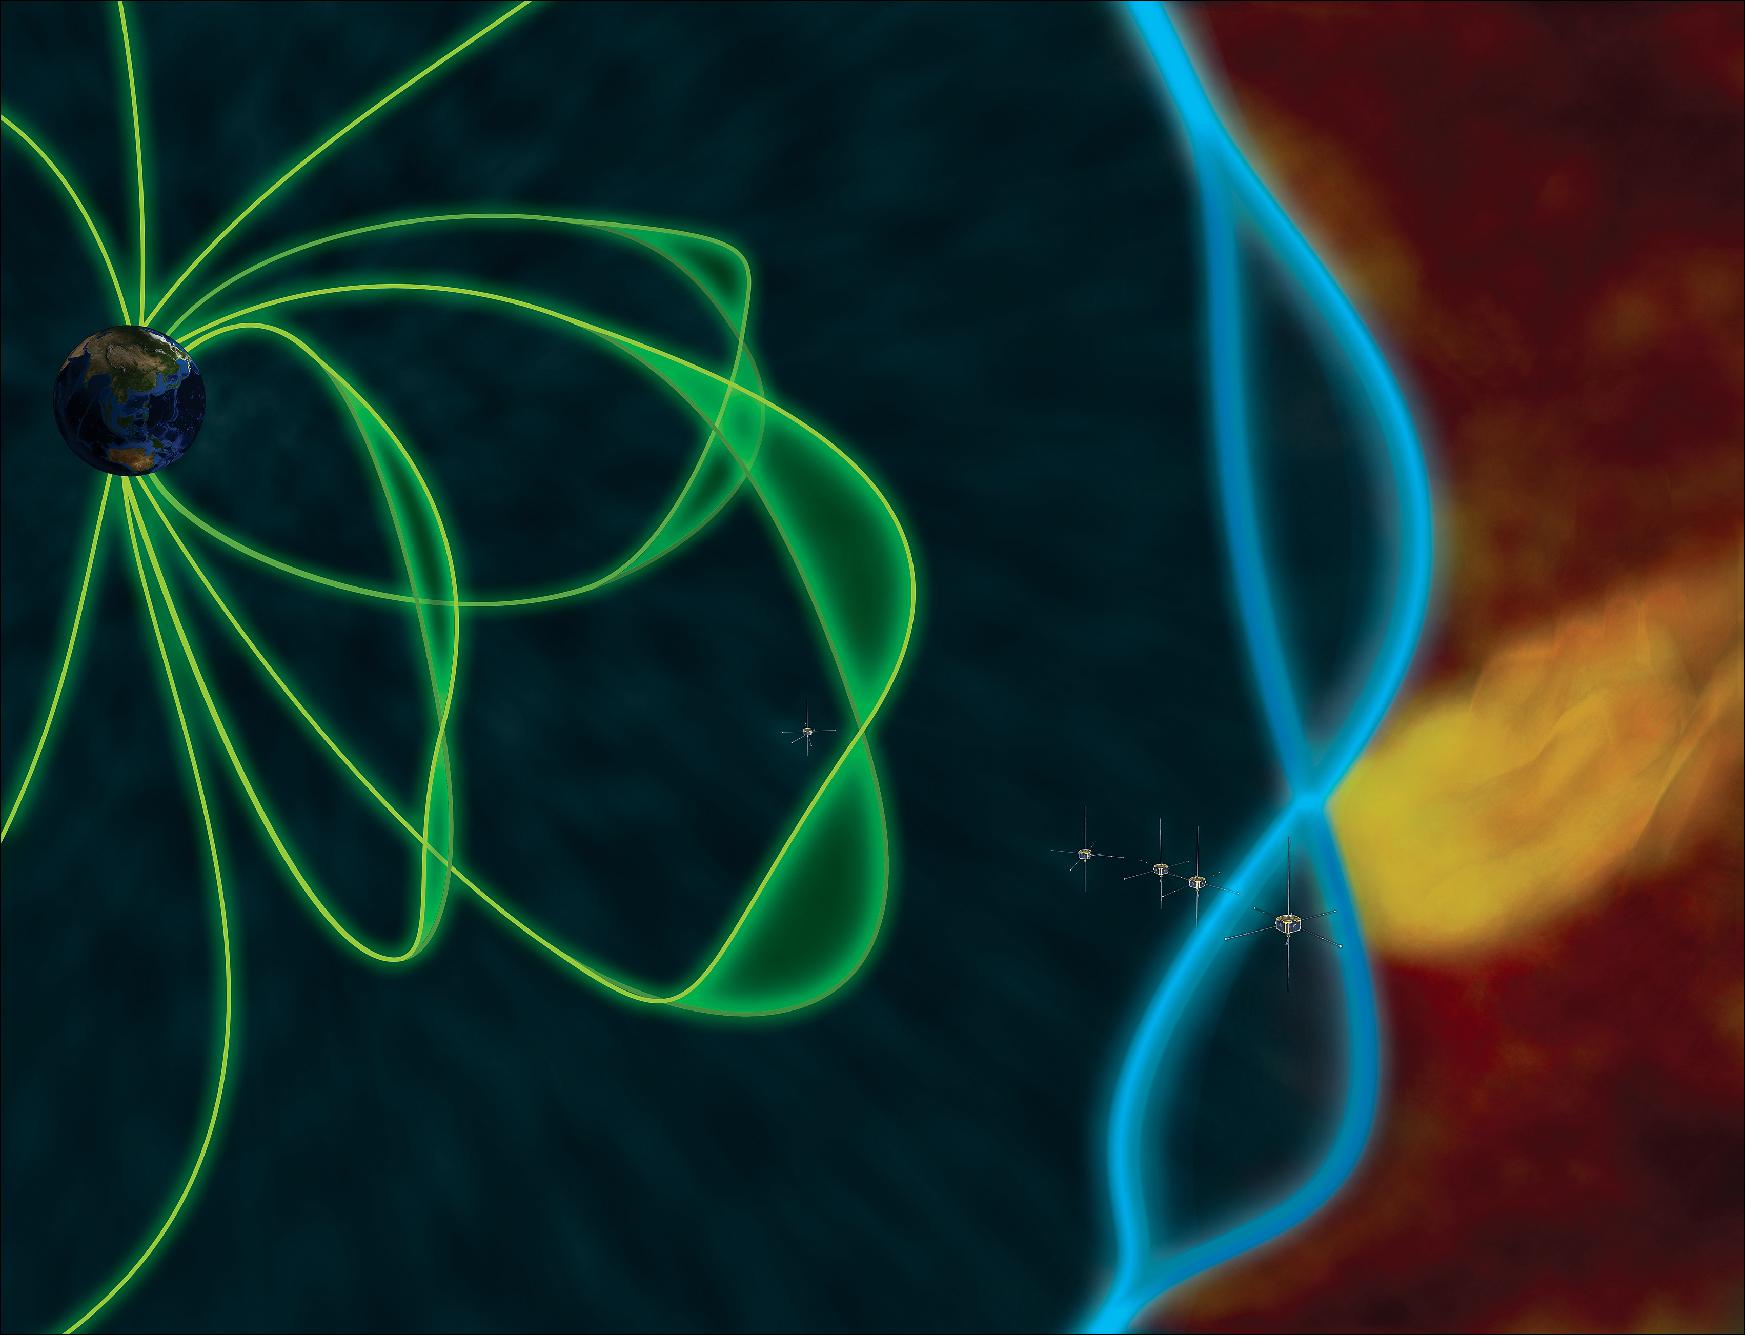 Figure 27: Illustration of a plasma jet impact (yellow) generating standing waves at the boundary (blue) of Earth’s magnetic shield (green), image credit: E. Masongsong/UCLA, M. Archer/QMUL, H. Hietala/UTU)